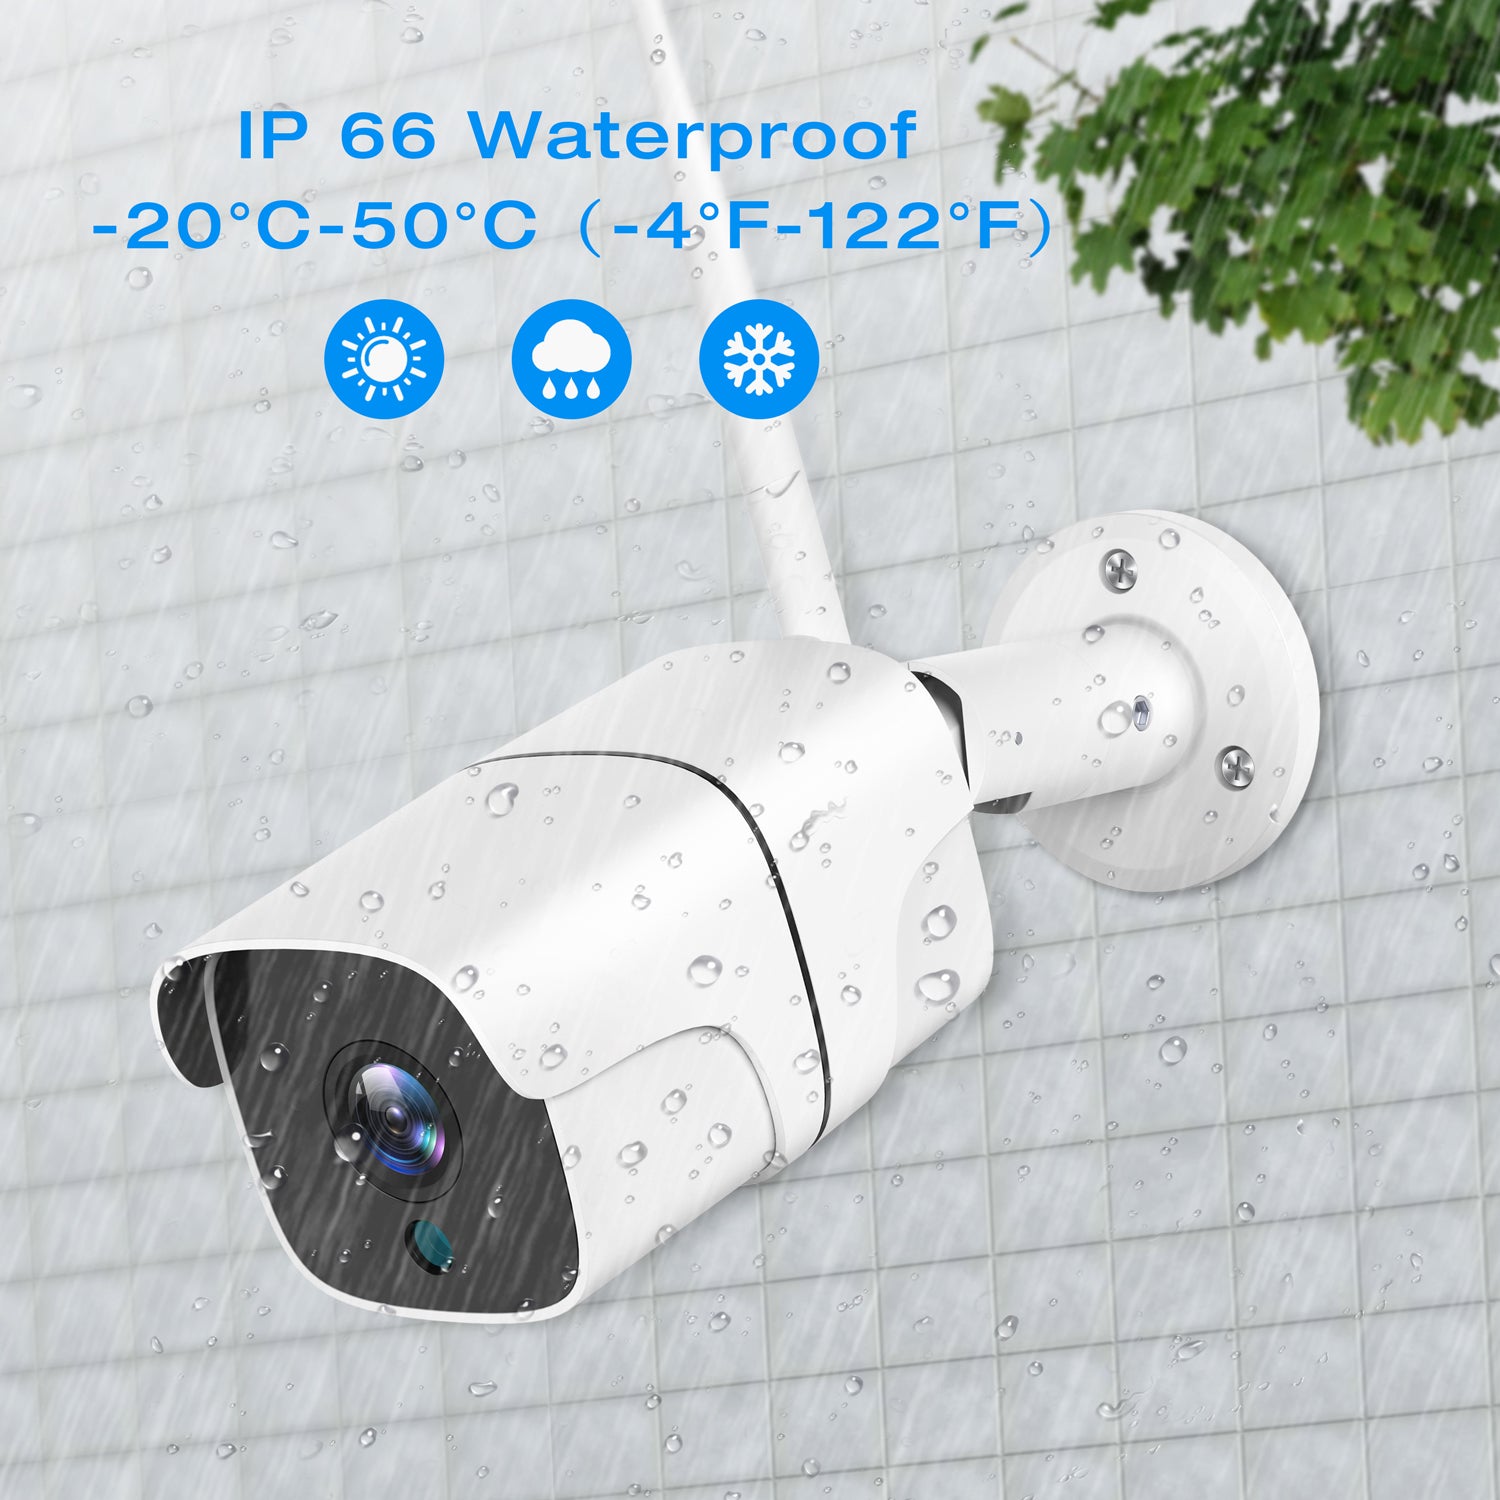 A Single Security Camera For Toguard W300/W400 Security System（Only available in EU）